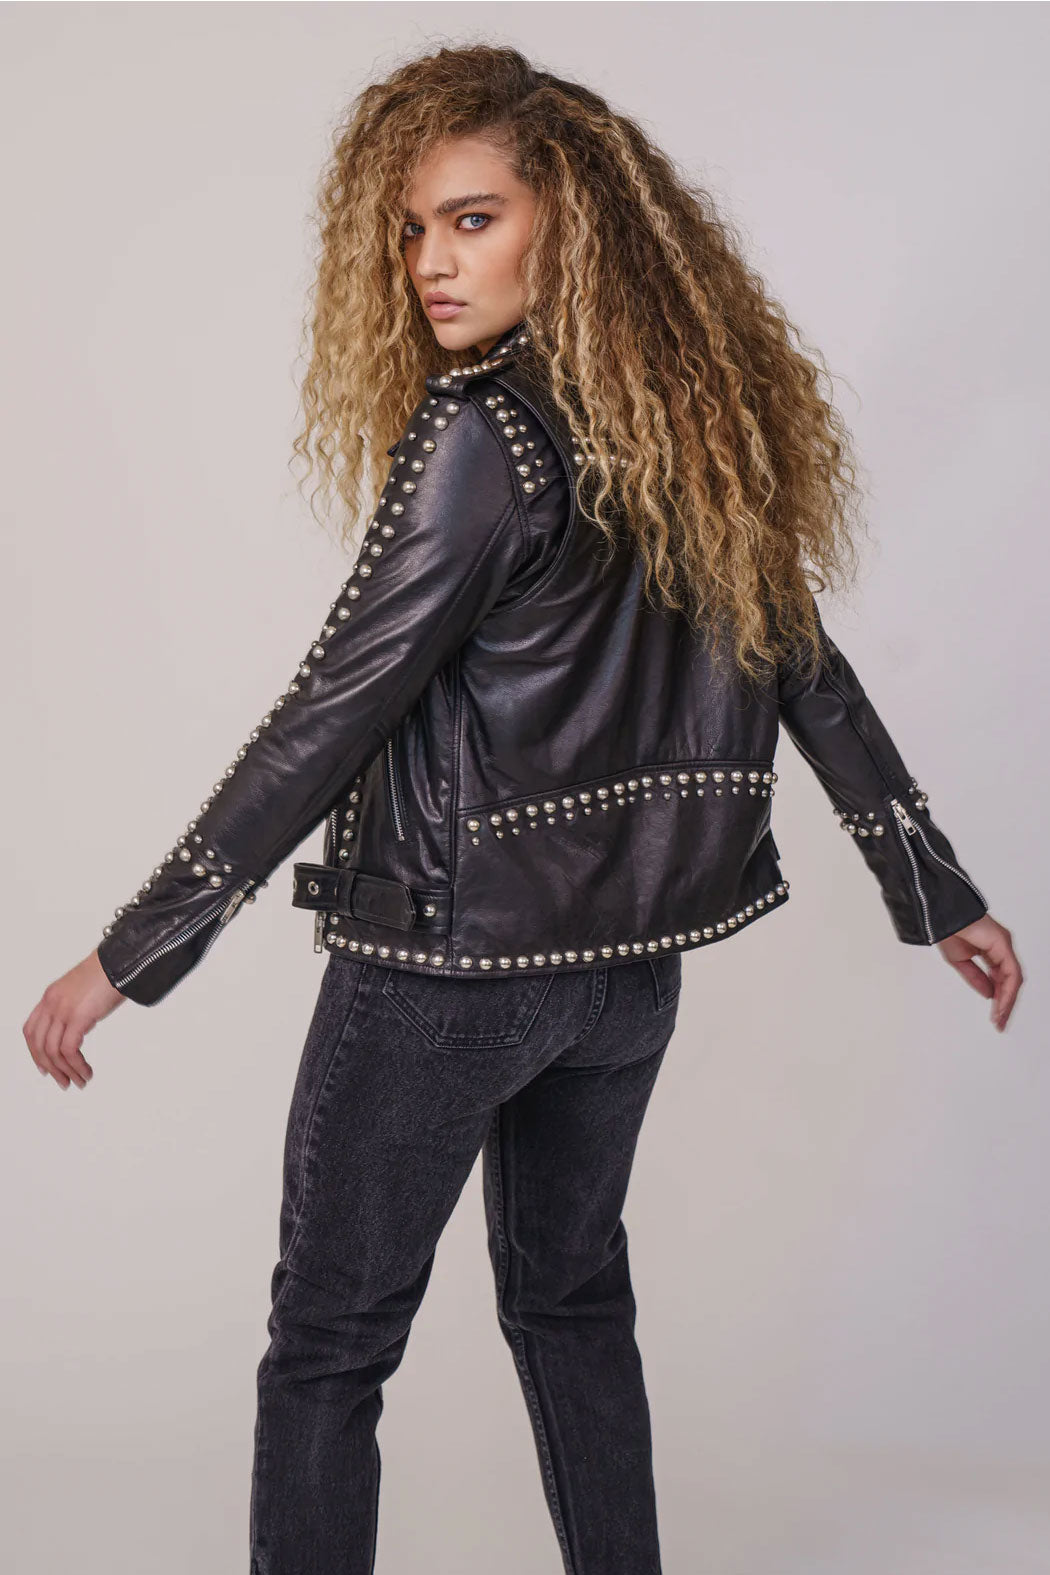 New Black Punk Silver Long Spiked Motorcycle Studded Black Leather Jacket For Women